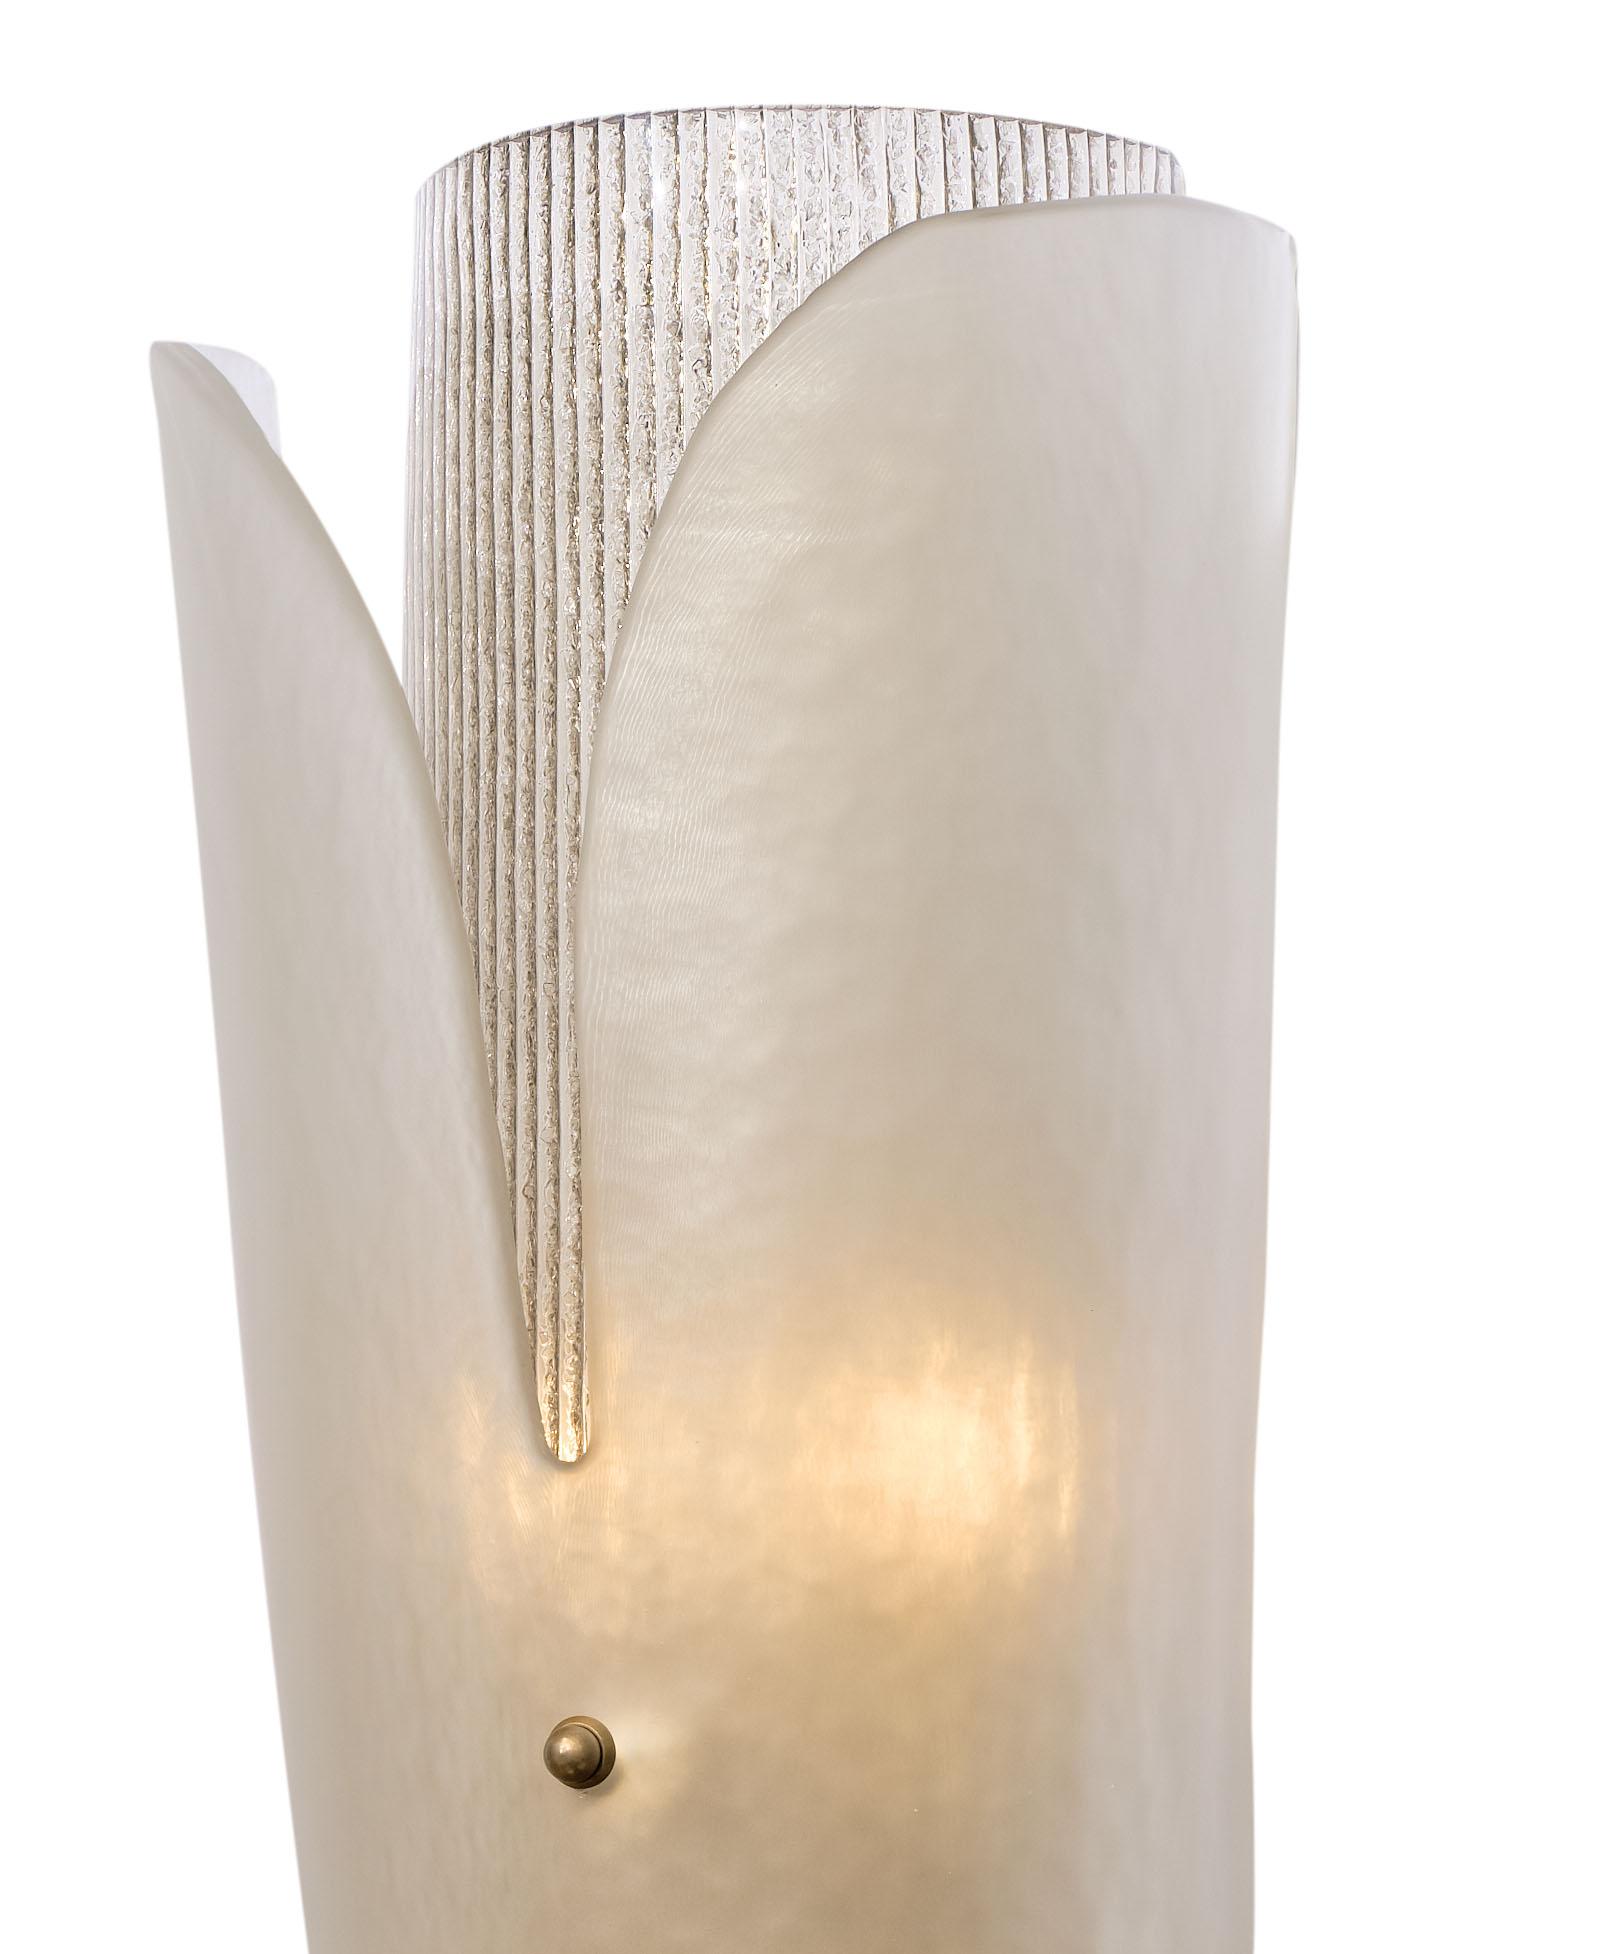 Murano glass wall sconces from the island of Murano in Italy. This hand blown pair has beautiful layers of textured glass mounted on a brass structure. The top layer has gentle curves for an elegant appearance. They have been newly wired to fit US